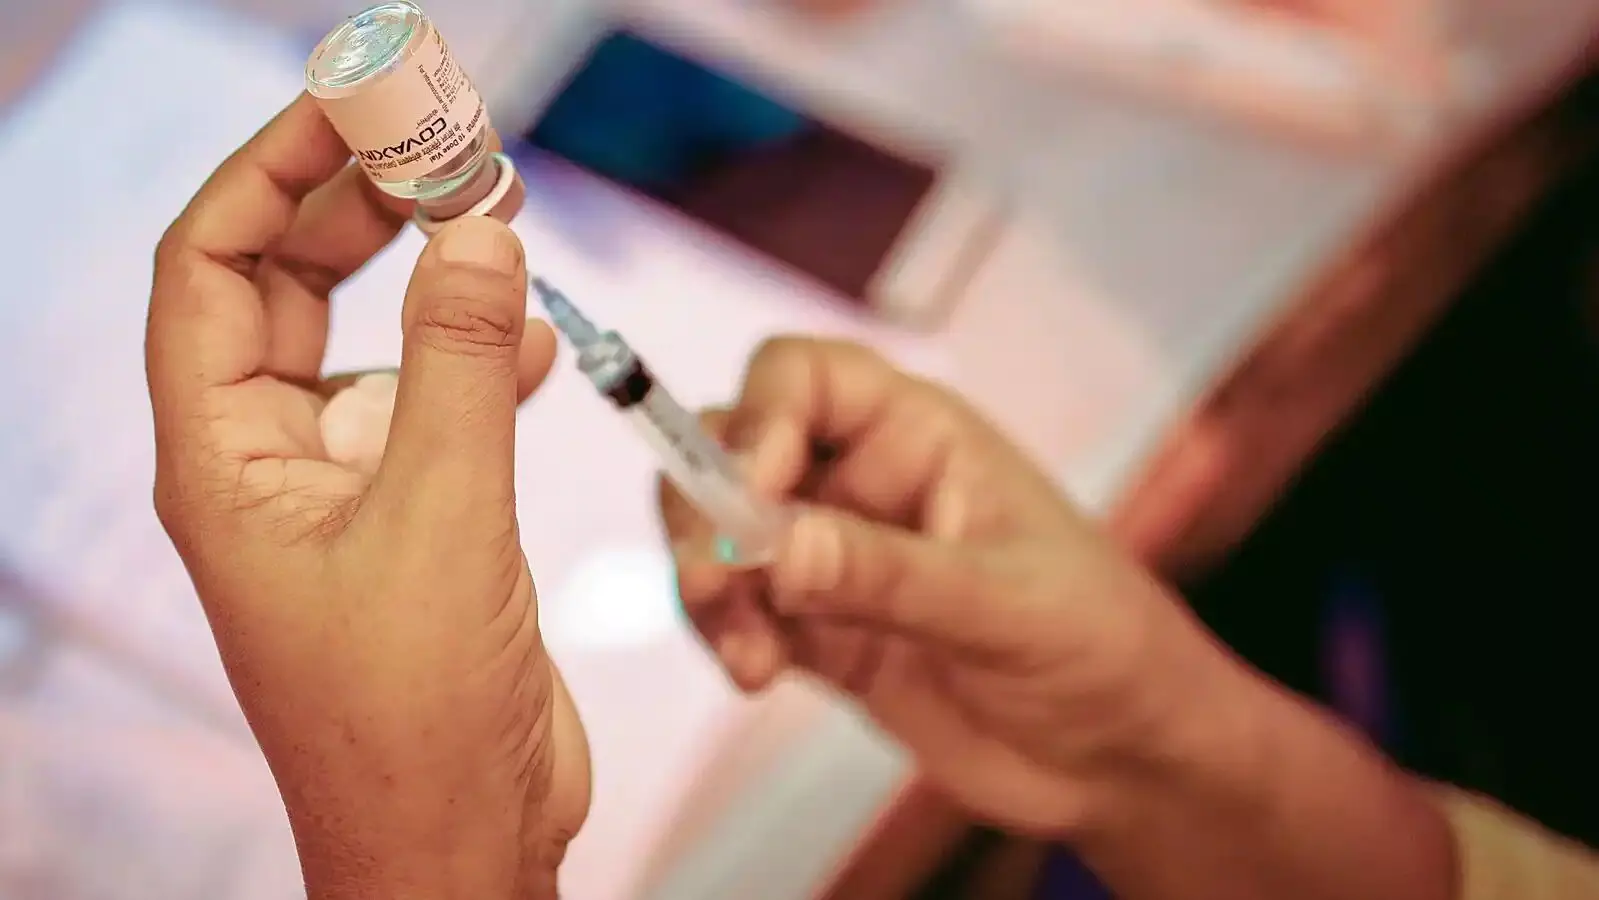 128 crore 78 lakh COVID vaccine doses administered so far under Nationwide Vaccination Drive